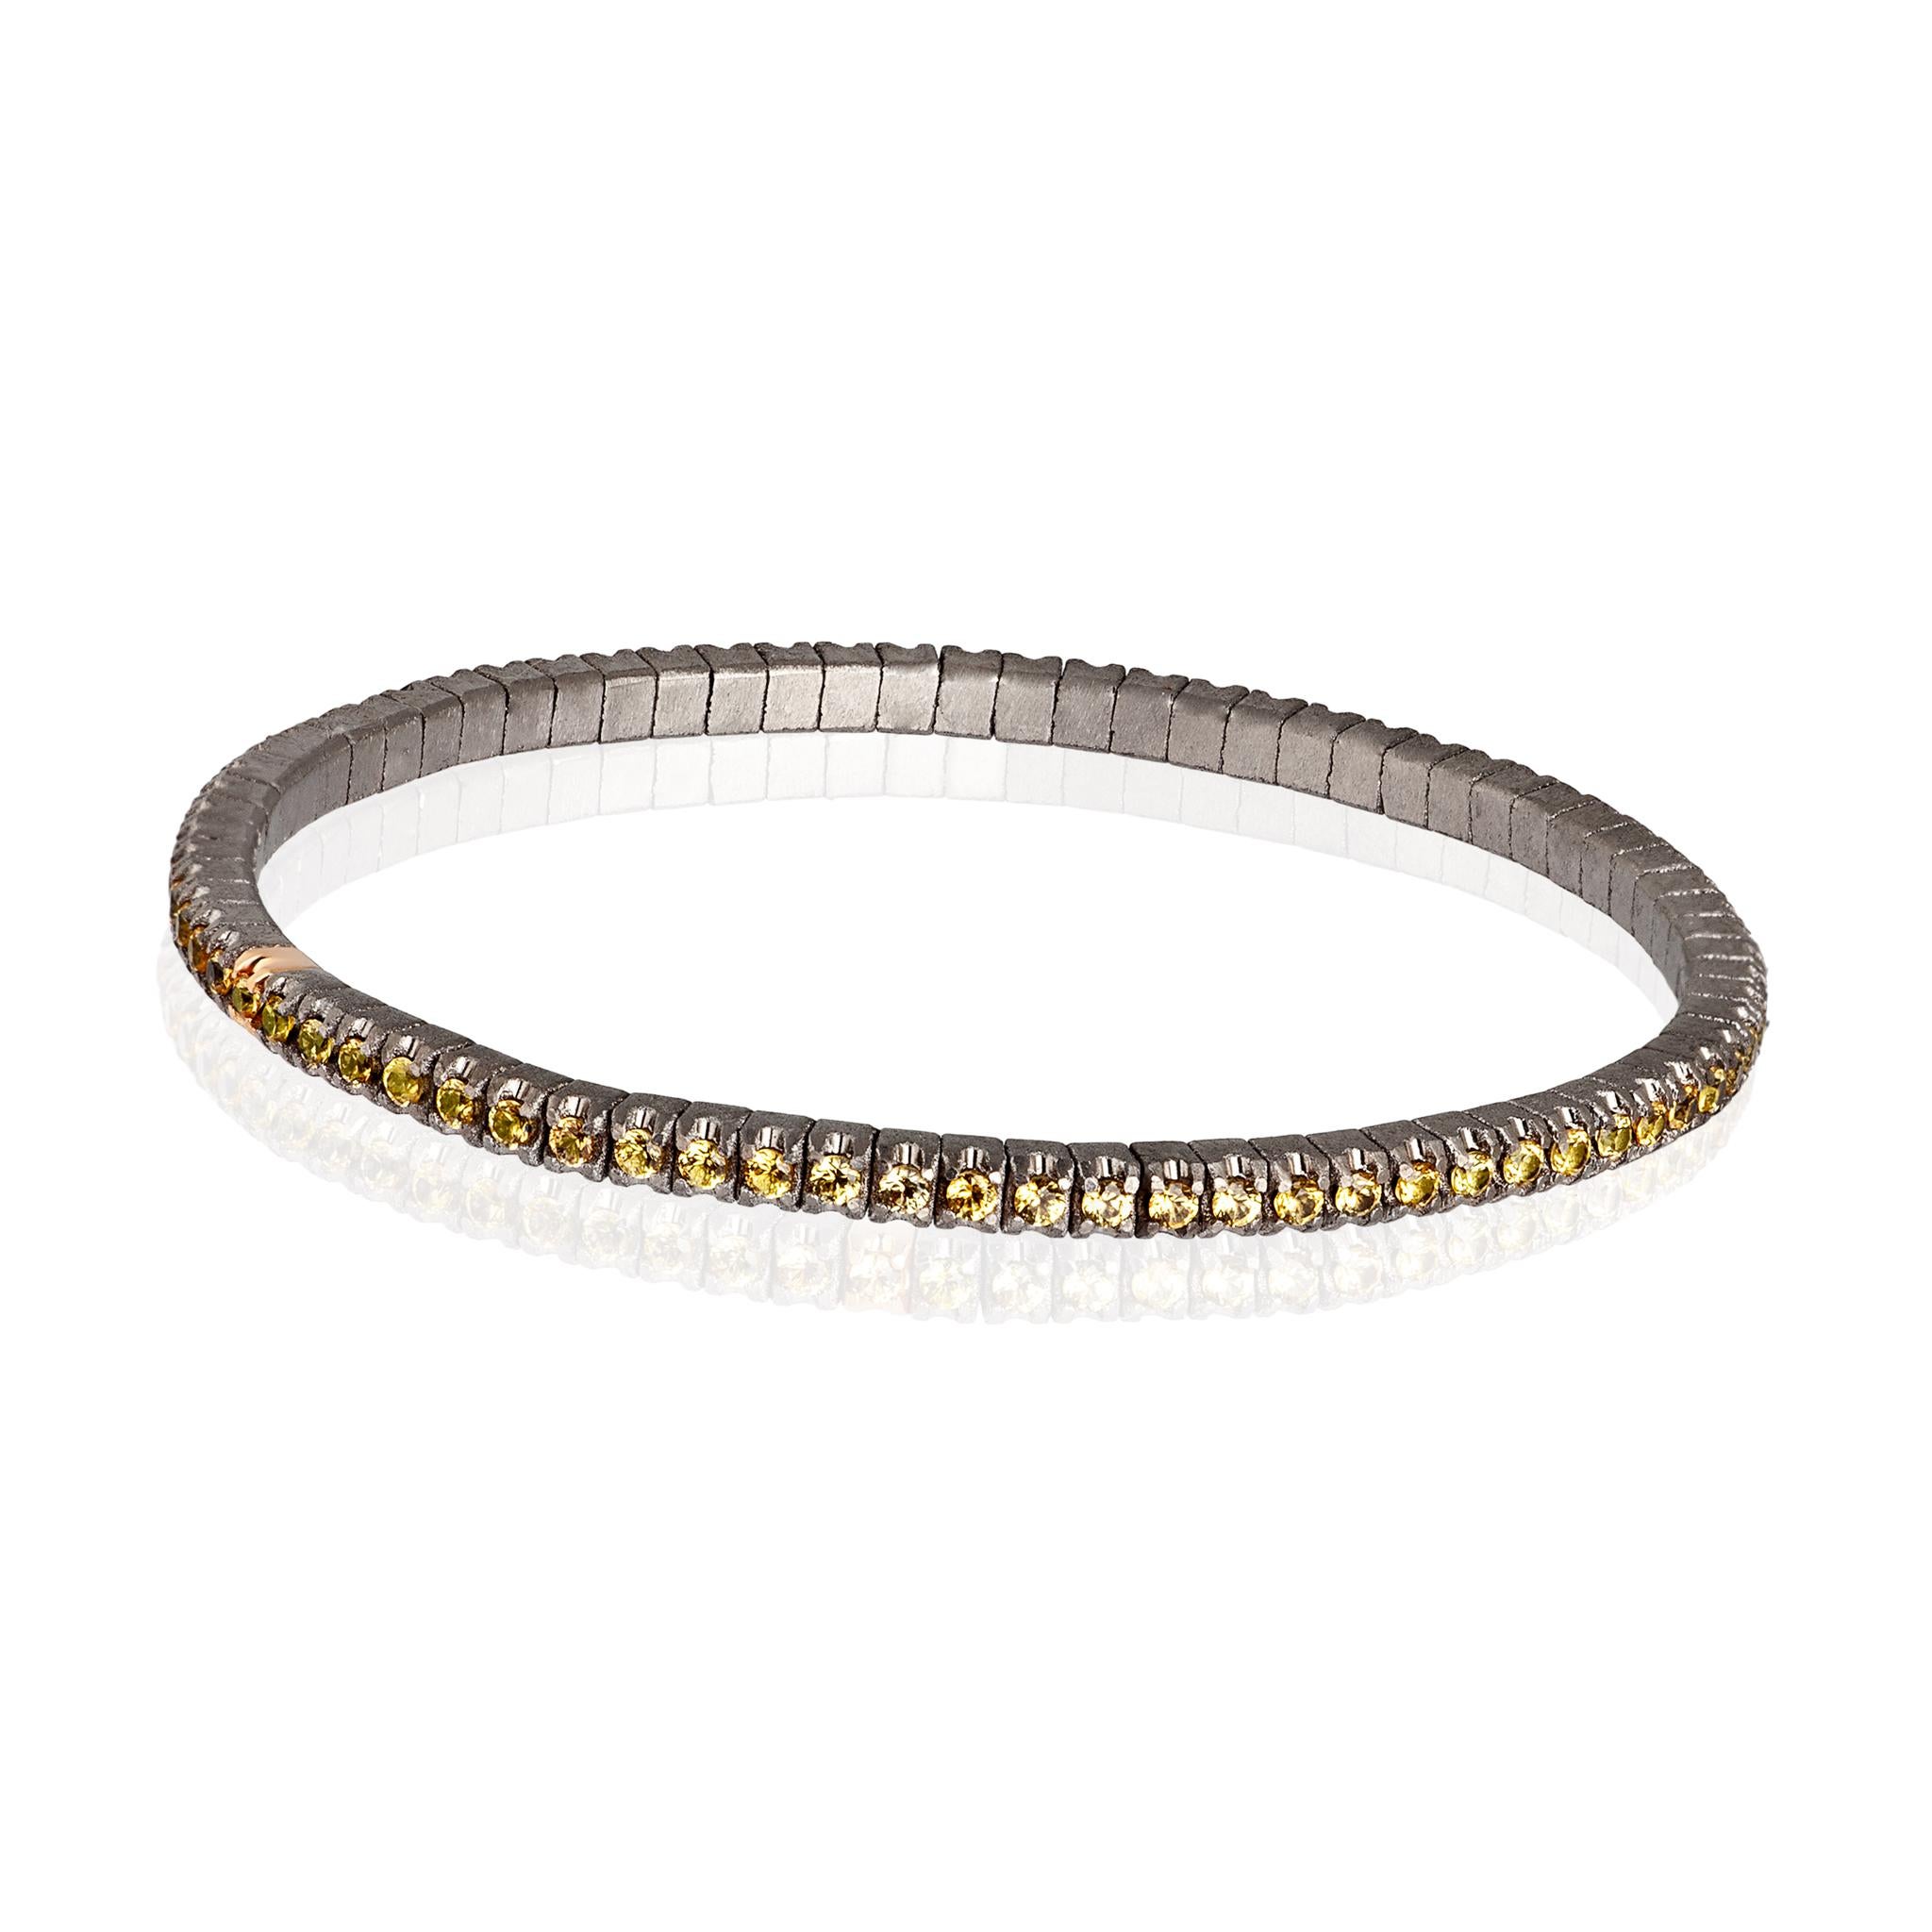 Men's Line Loop bracelet in titanium and yellow sapphires (ct. 2.15 approx.). The structure consists of an unbroken row of 3-point diamonds set on titanium griffes and one in 18kt red gold placed side by side on an elastic link. This bracelet